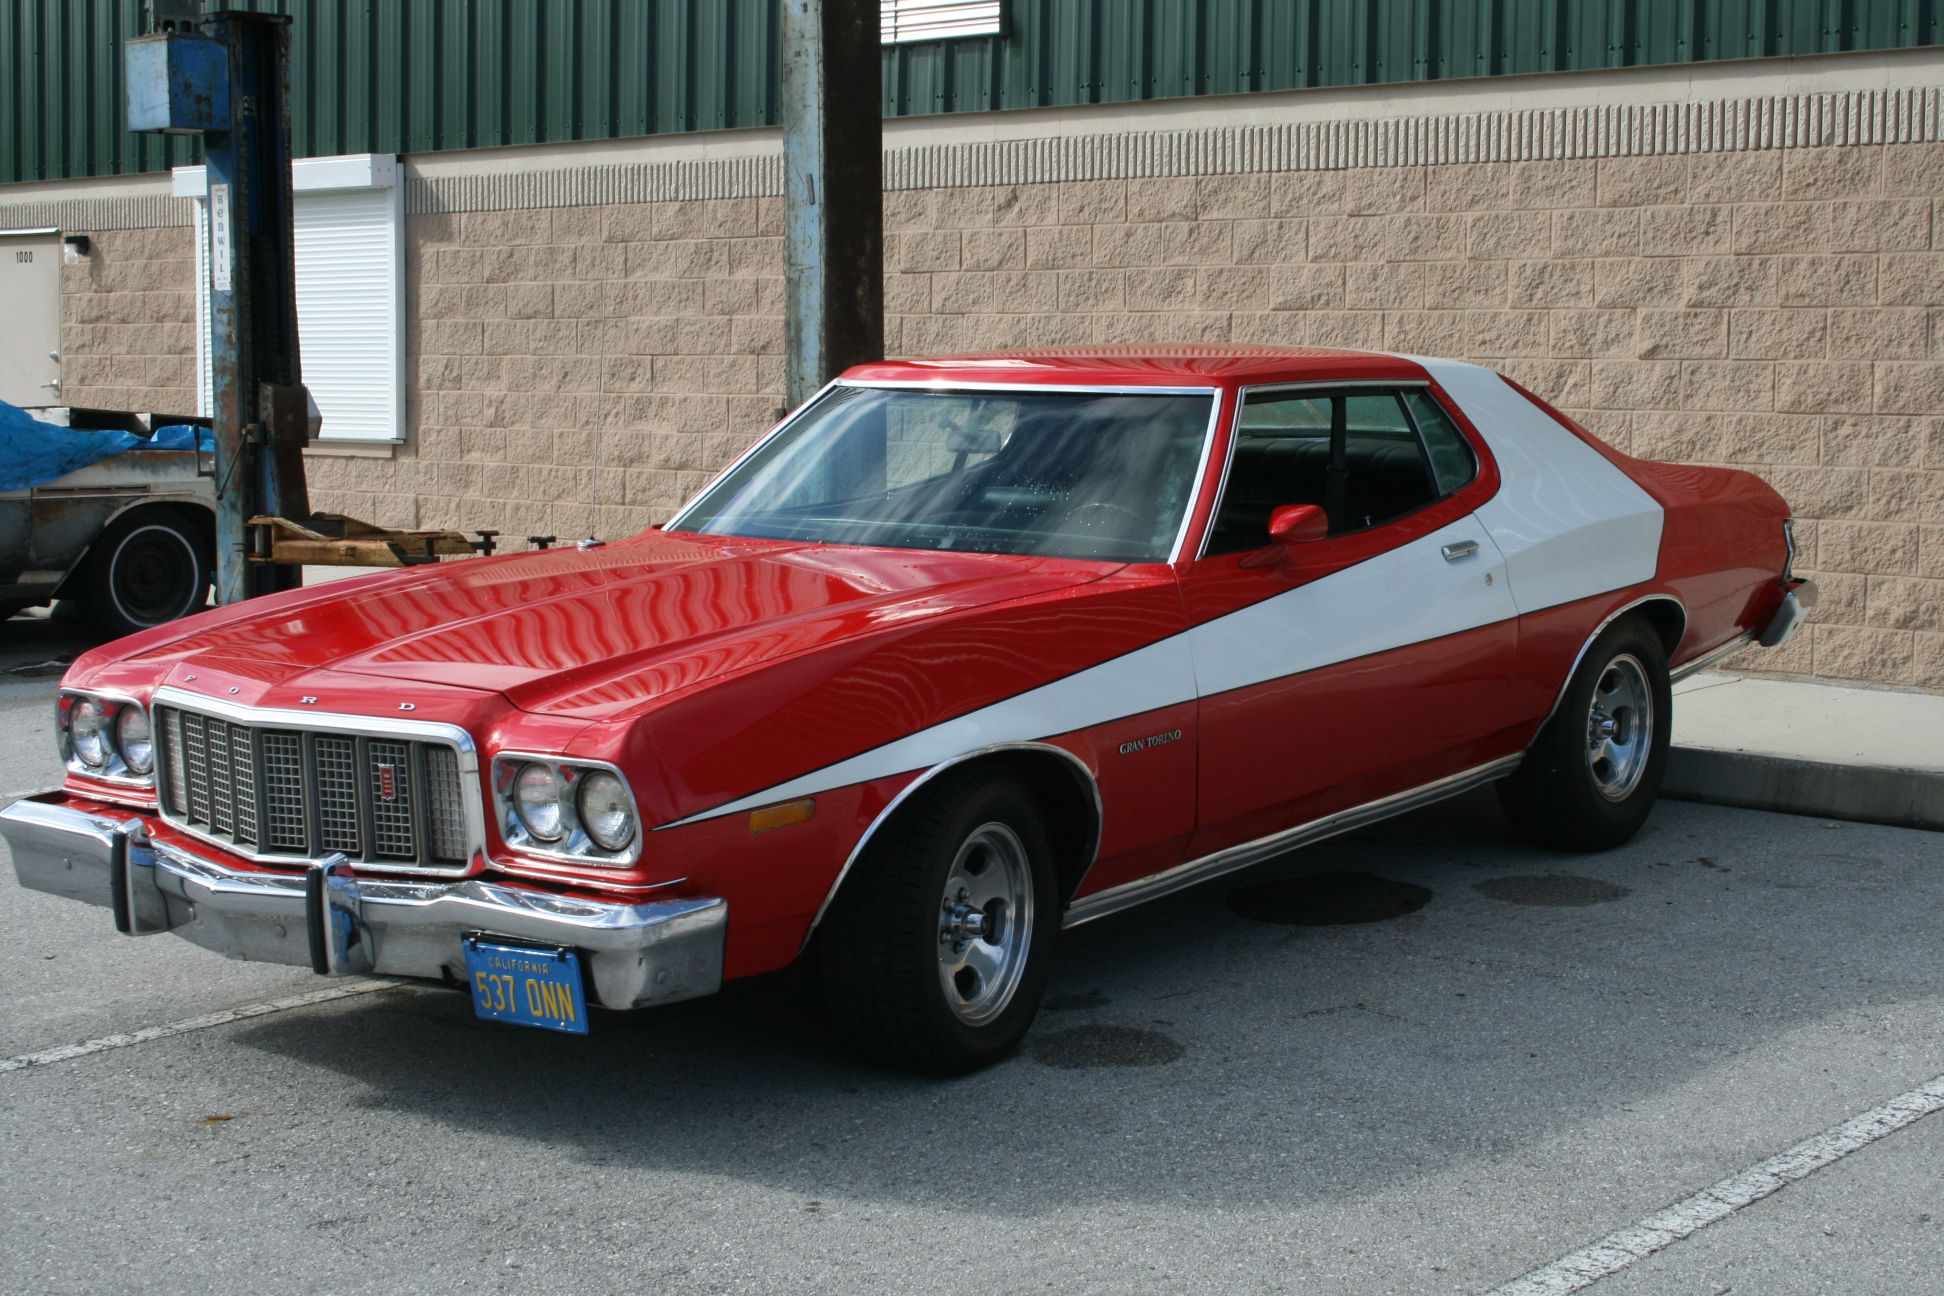 Ford Gran Torino Backgrounds on Wallpapers Vista